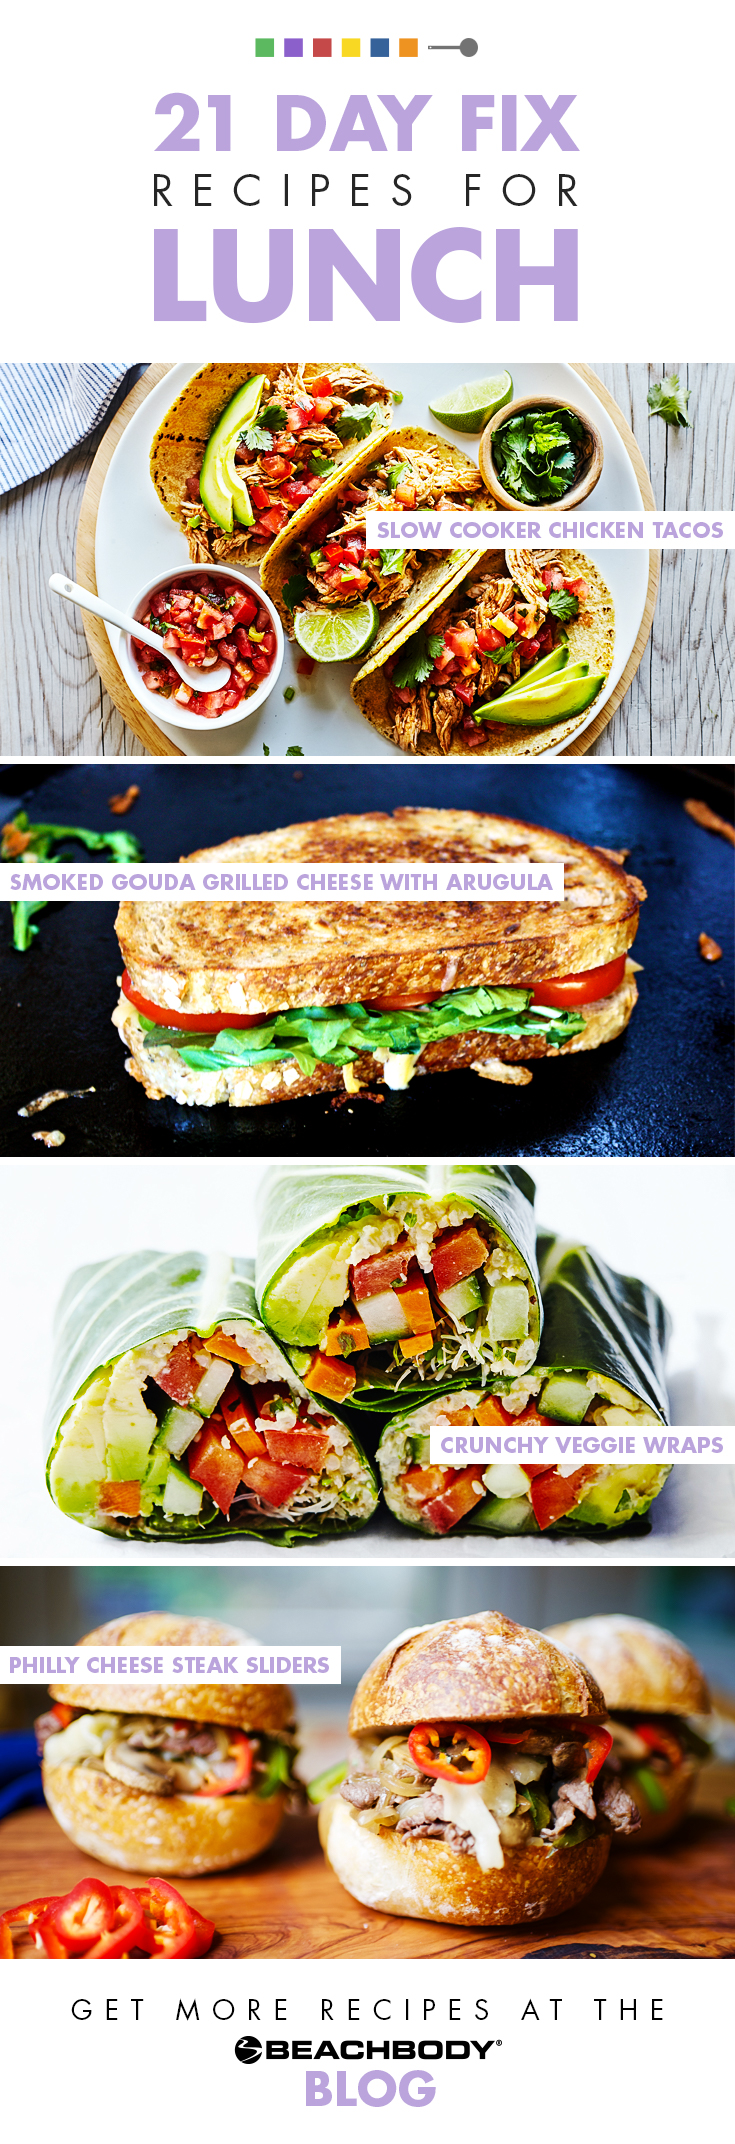 21 Day Fix Recipes for lunch 